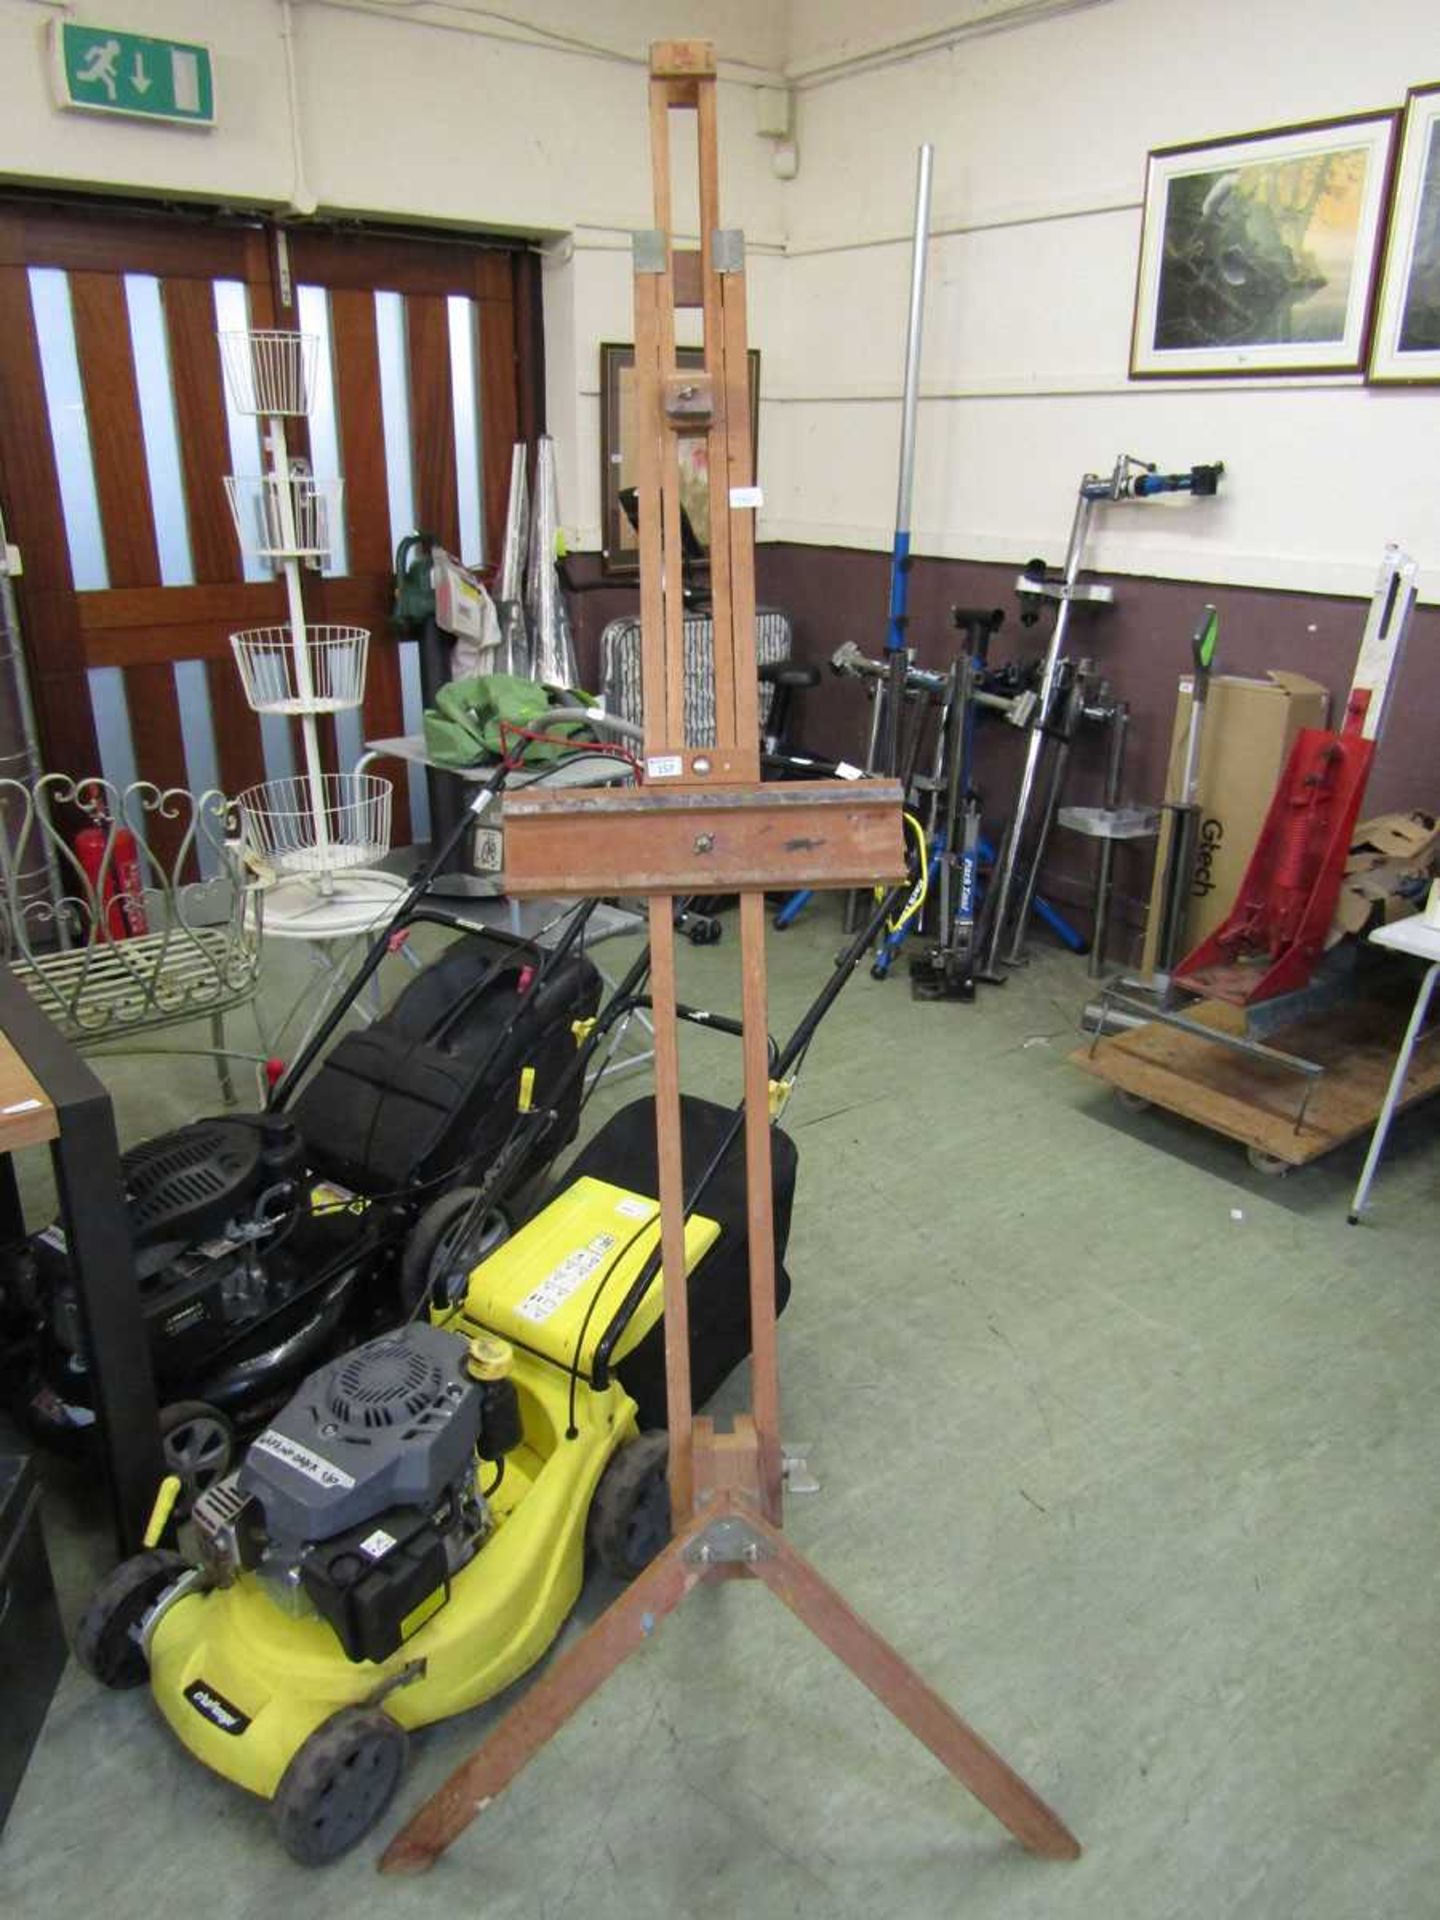 An early 20th century wooden artist's easel